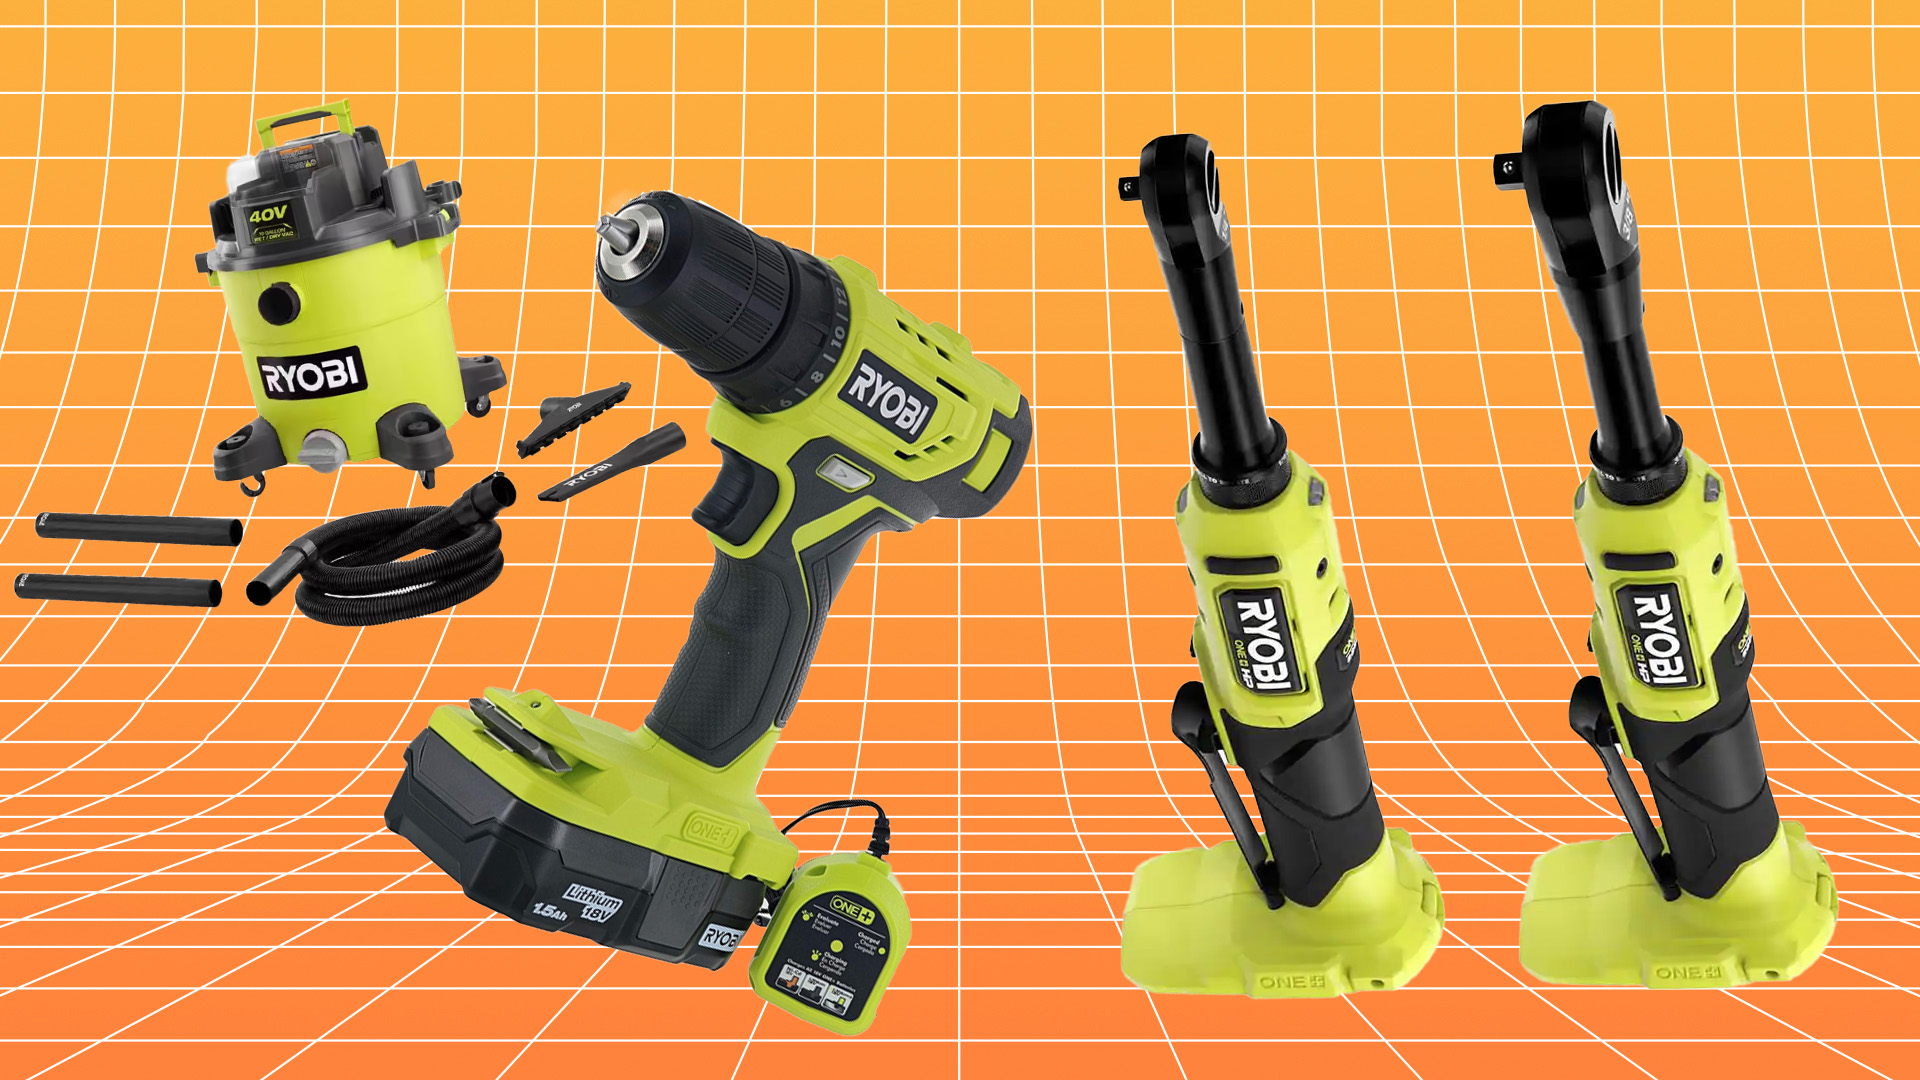 Cyber Monday Deals on Ryobi Tools Are Still Going Strong